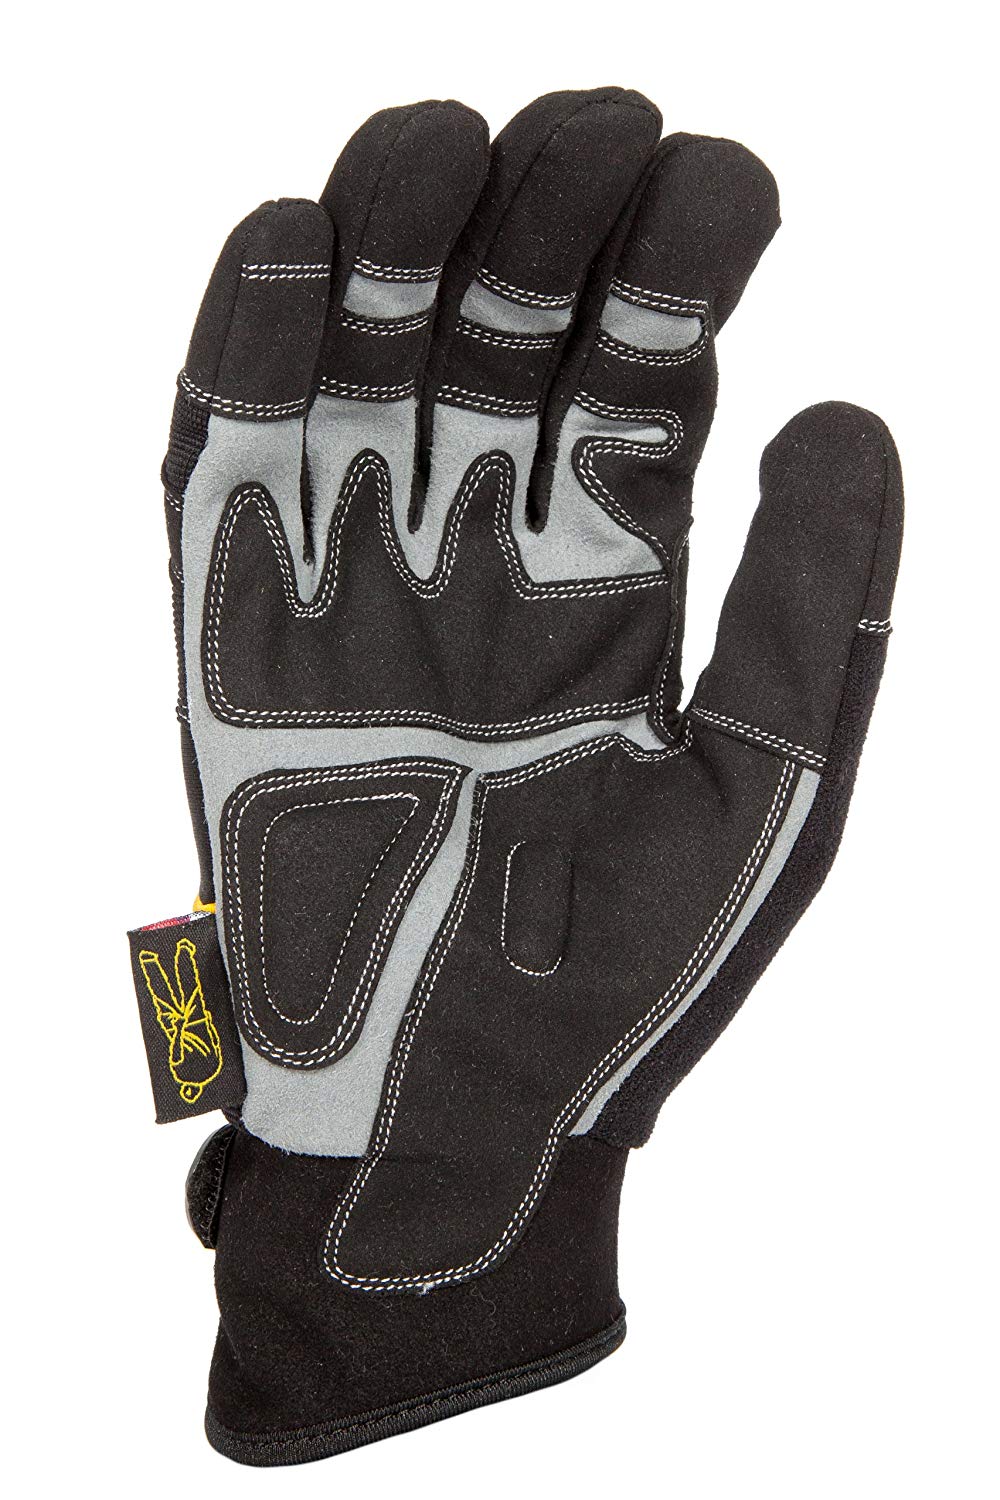 Dirty Rigger Comfort Fit Work Glove